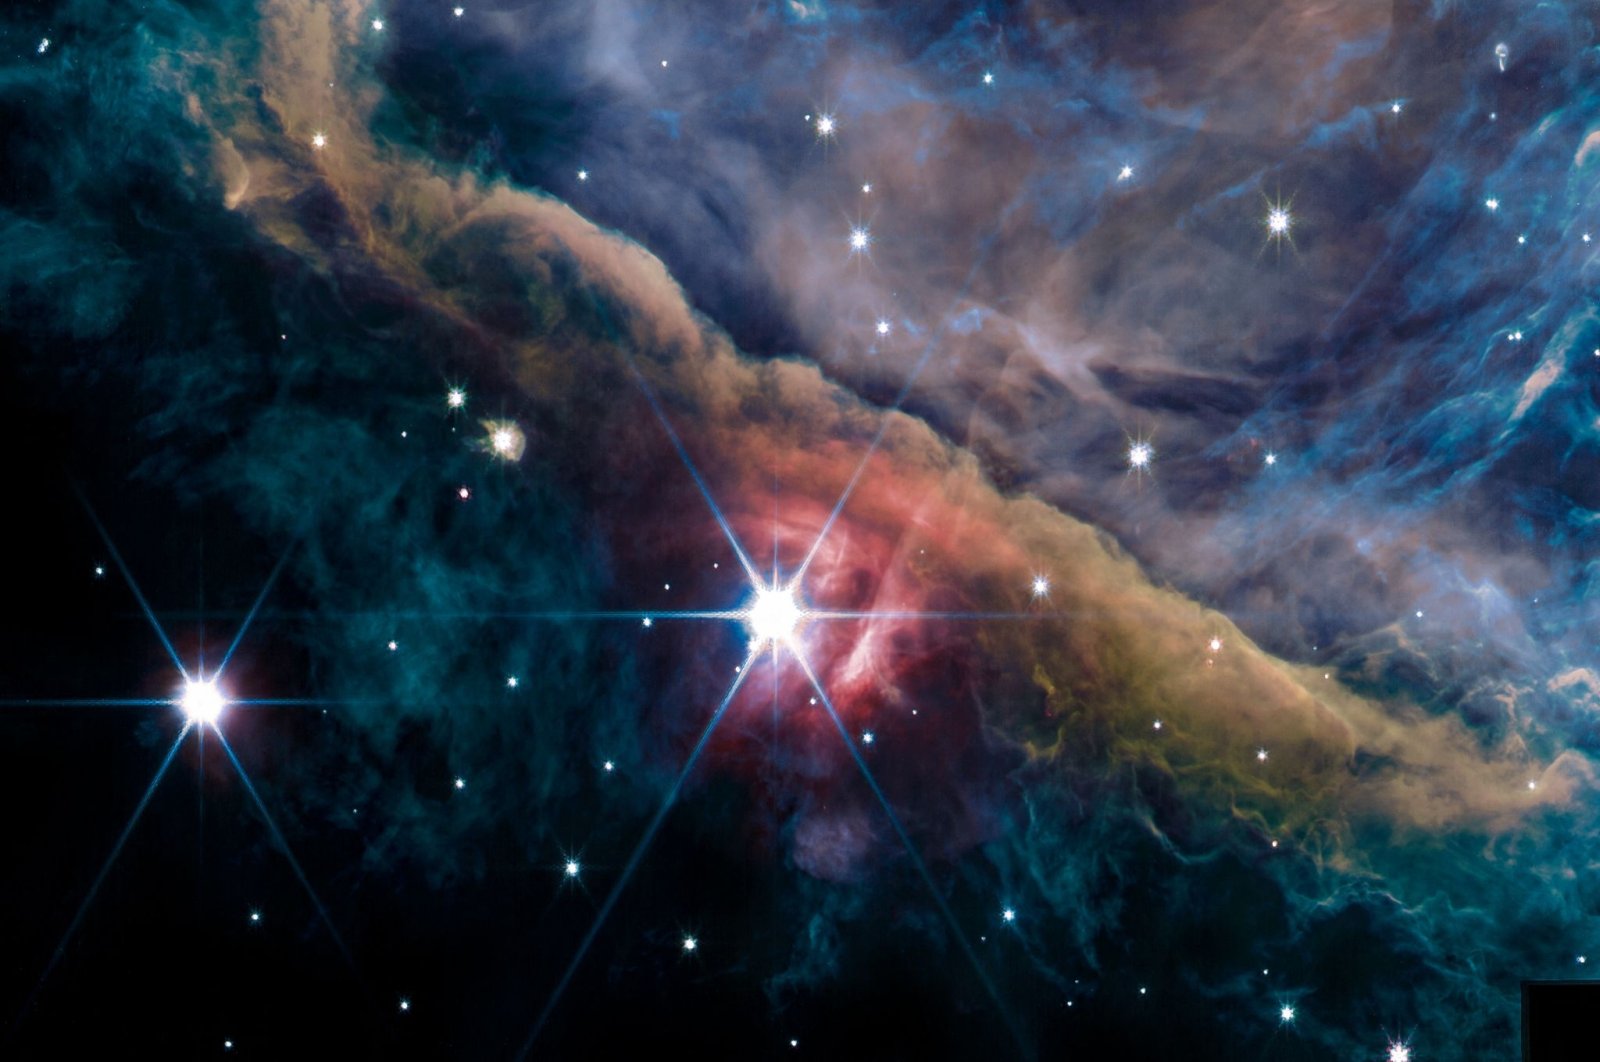 This handout photo provided by NASA on Sept. 12, 2022, shows the inner region of the Orion Nebula as seen by the James Webb Space Telescope’s NIRCam instrument. (Photo by Handout/NASA/ESA/CSA via AFP)